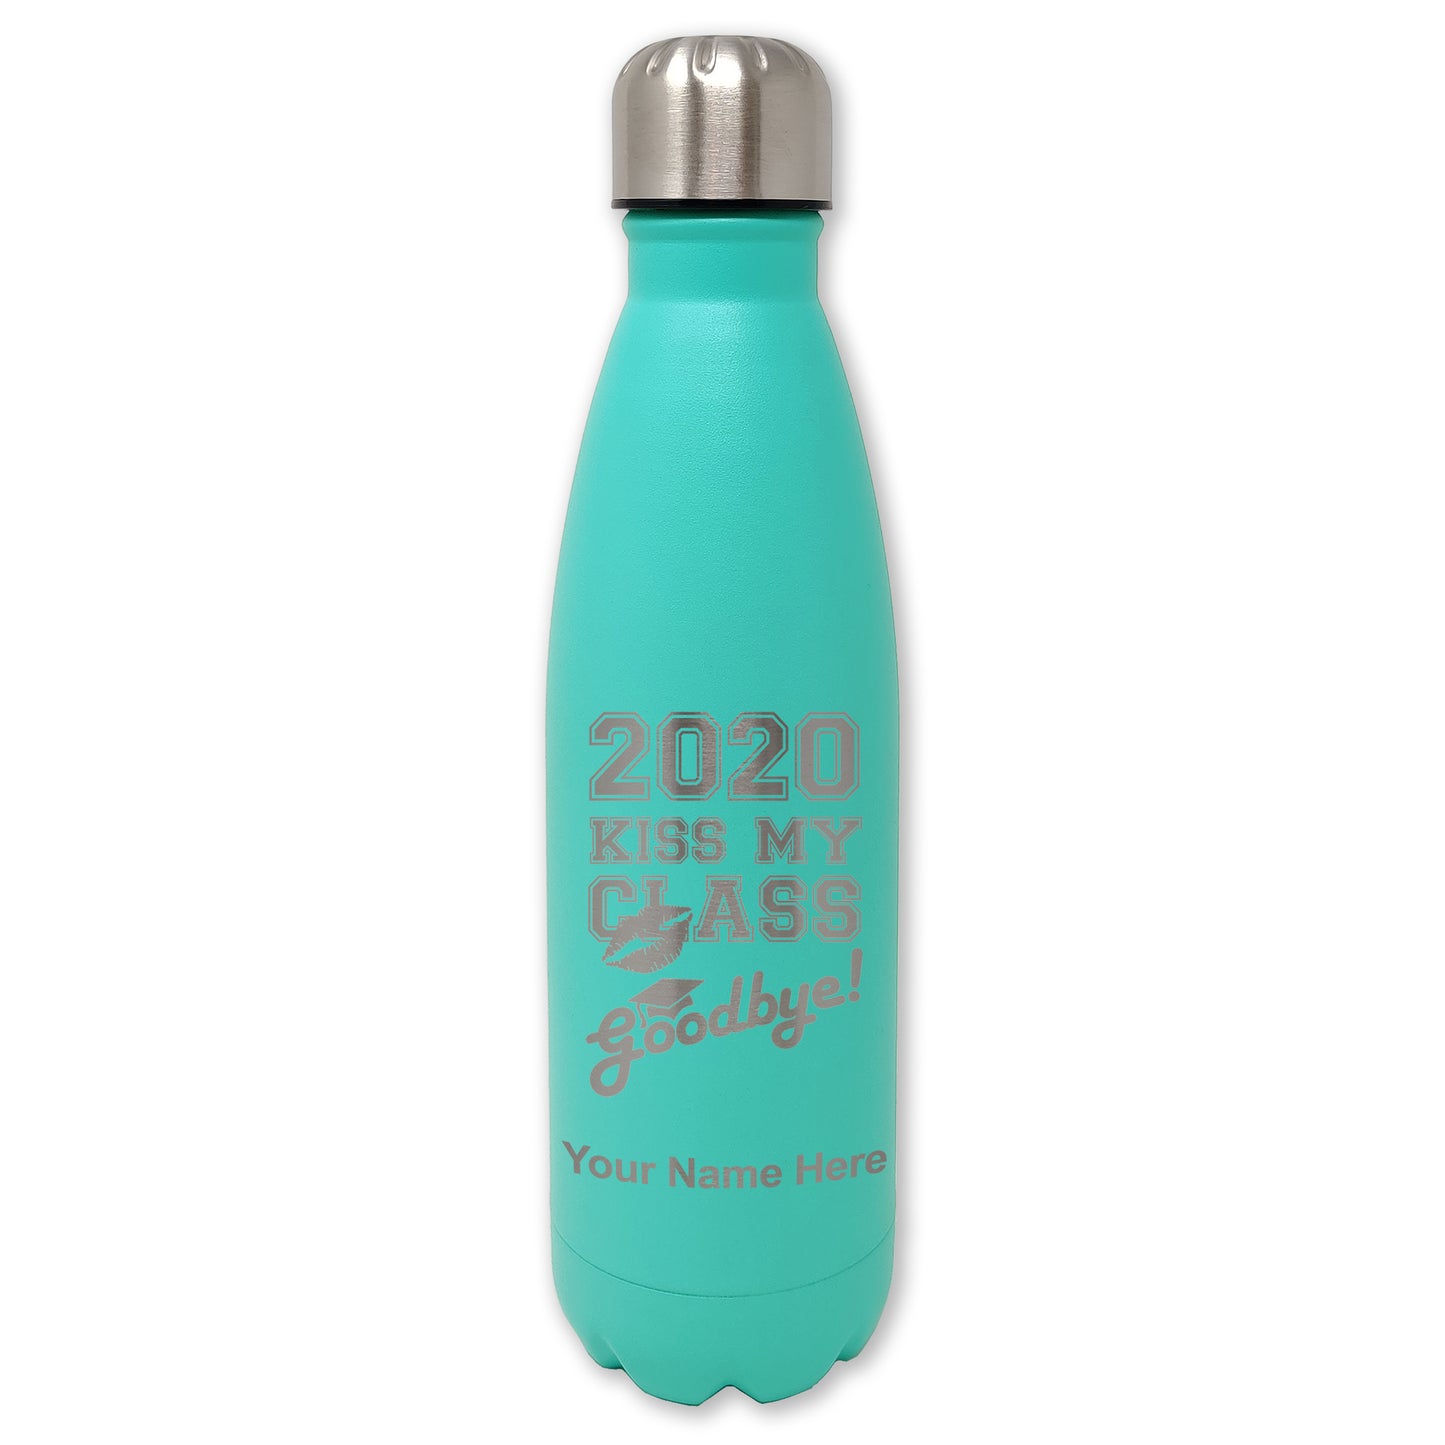 LaserGram Double Wall Water Bottle, Kiss My Class Goodbye 2020, 2021, 2022, 2023, 2024, 2025, Personalized Engraving Included